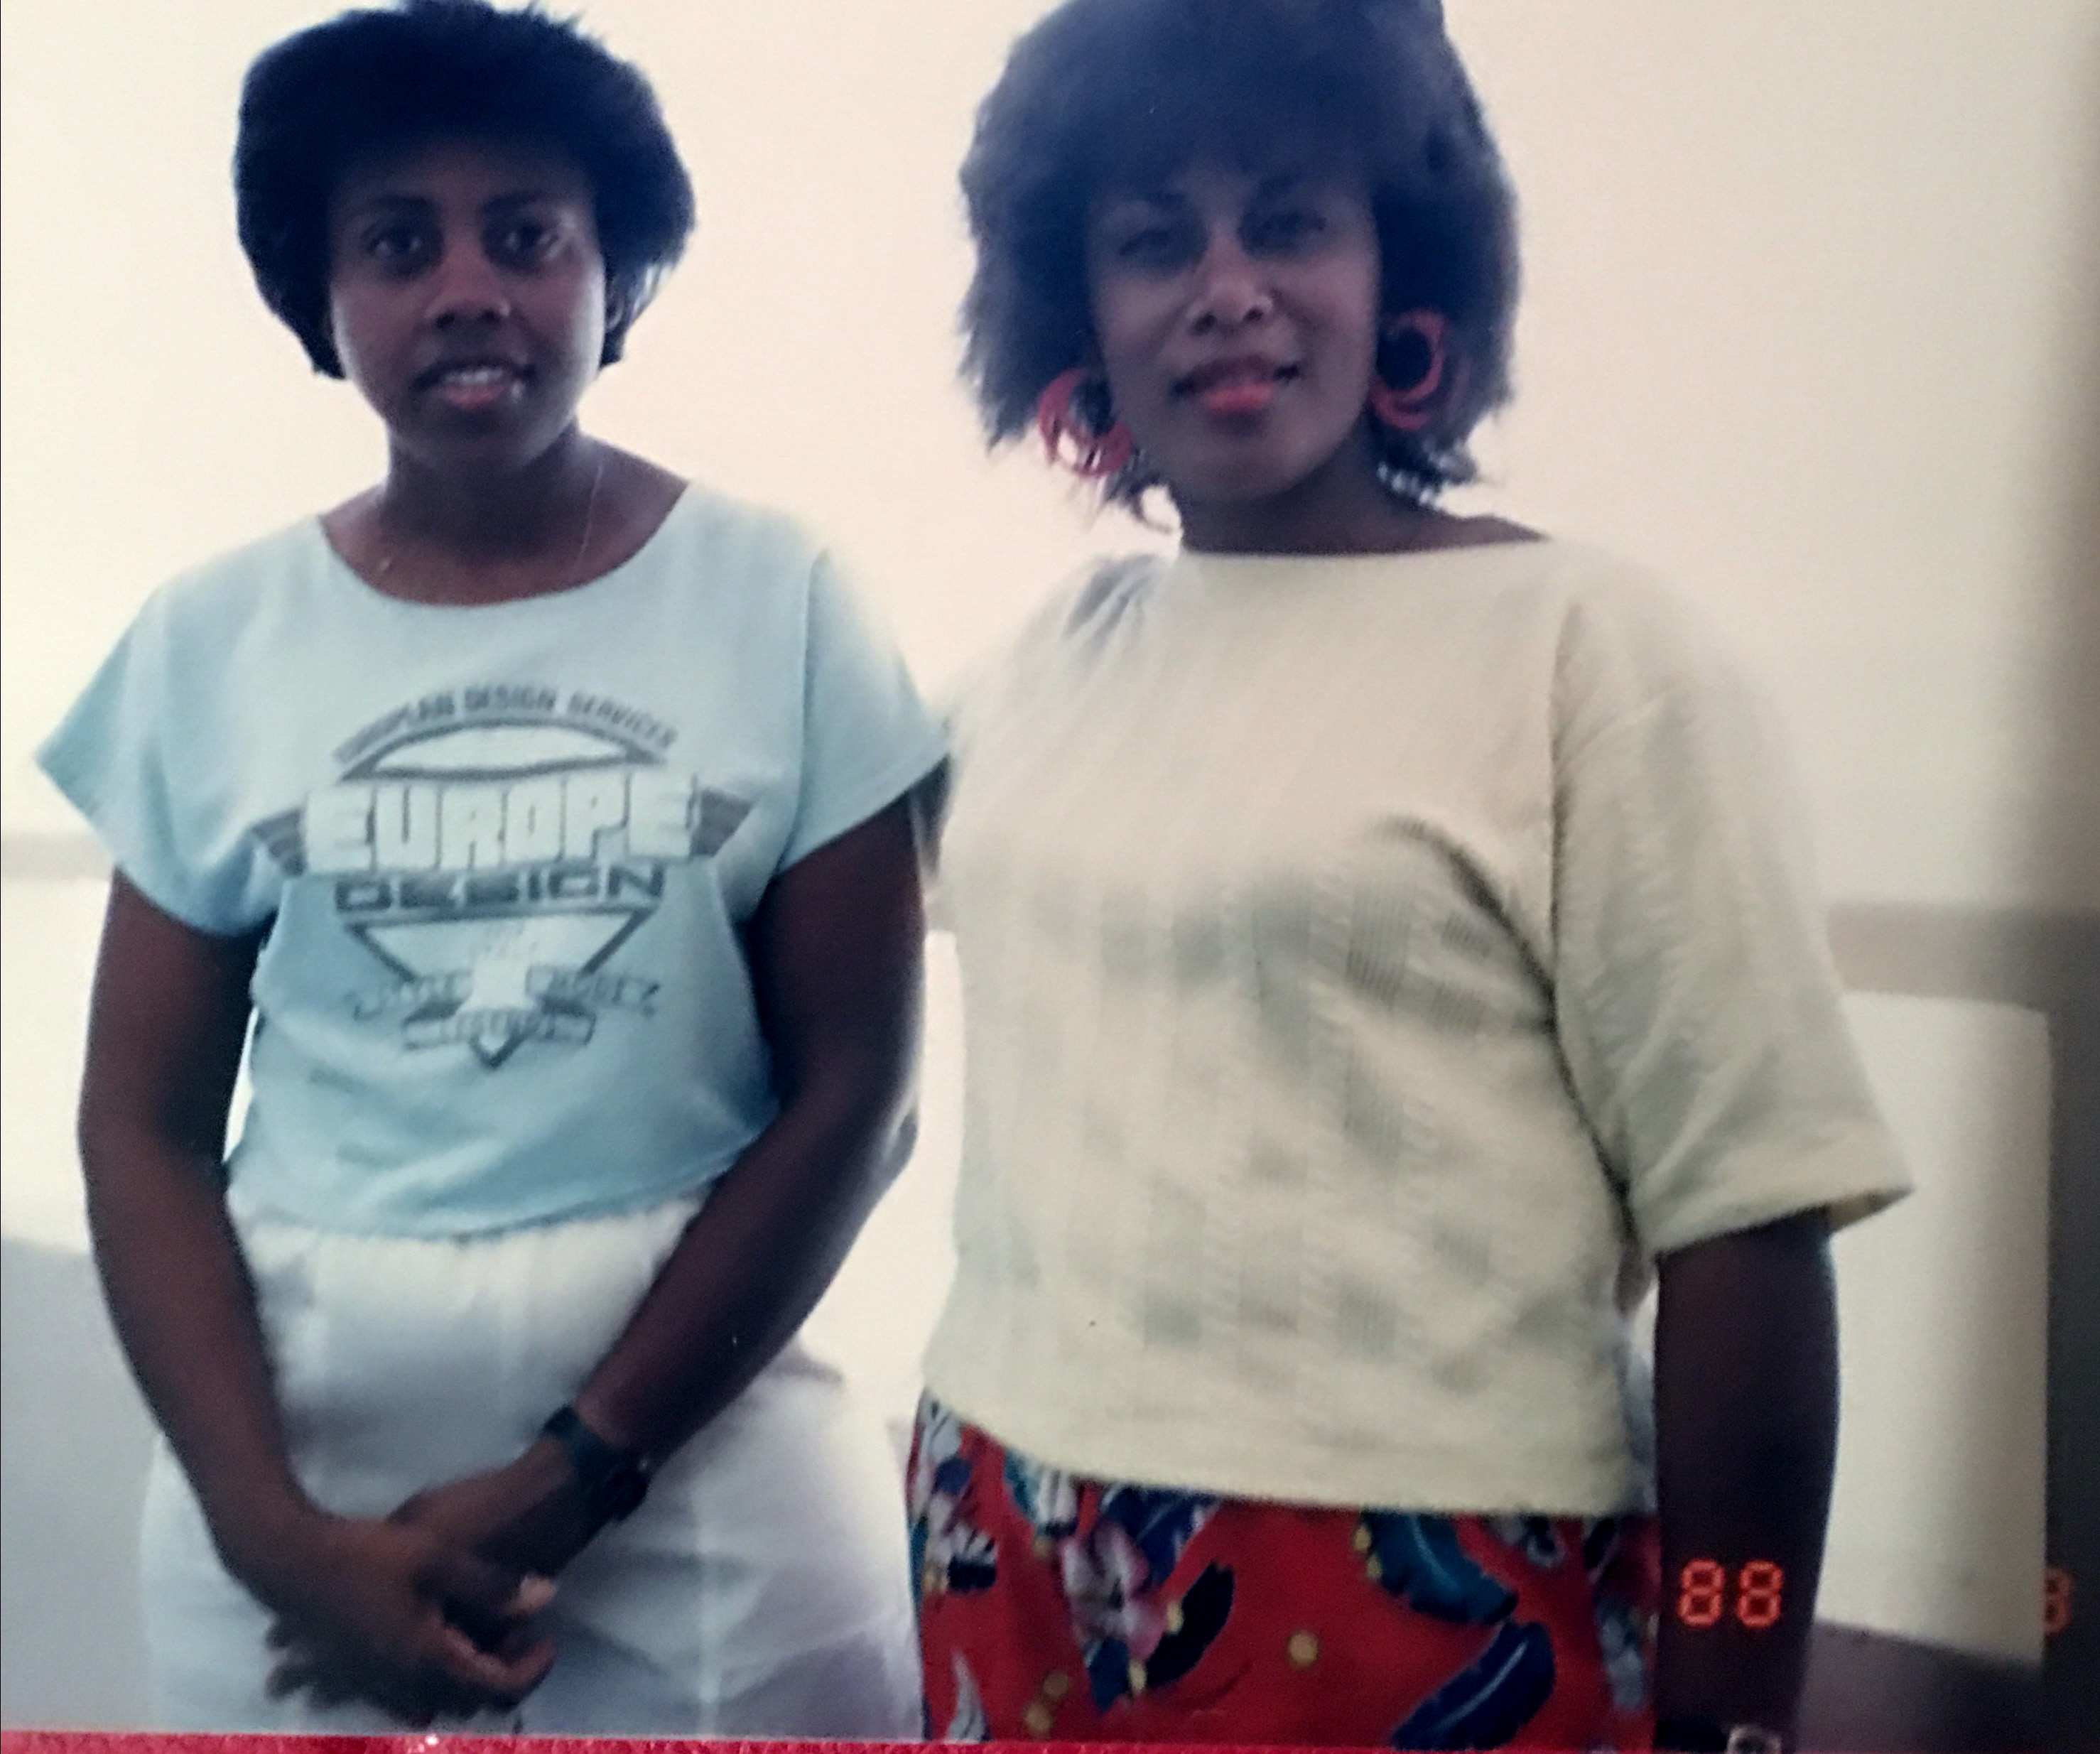 Puerto Rico 1988 with sis
